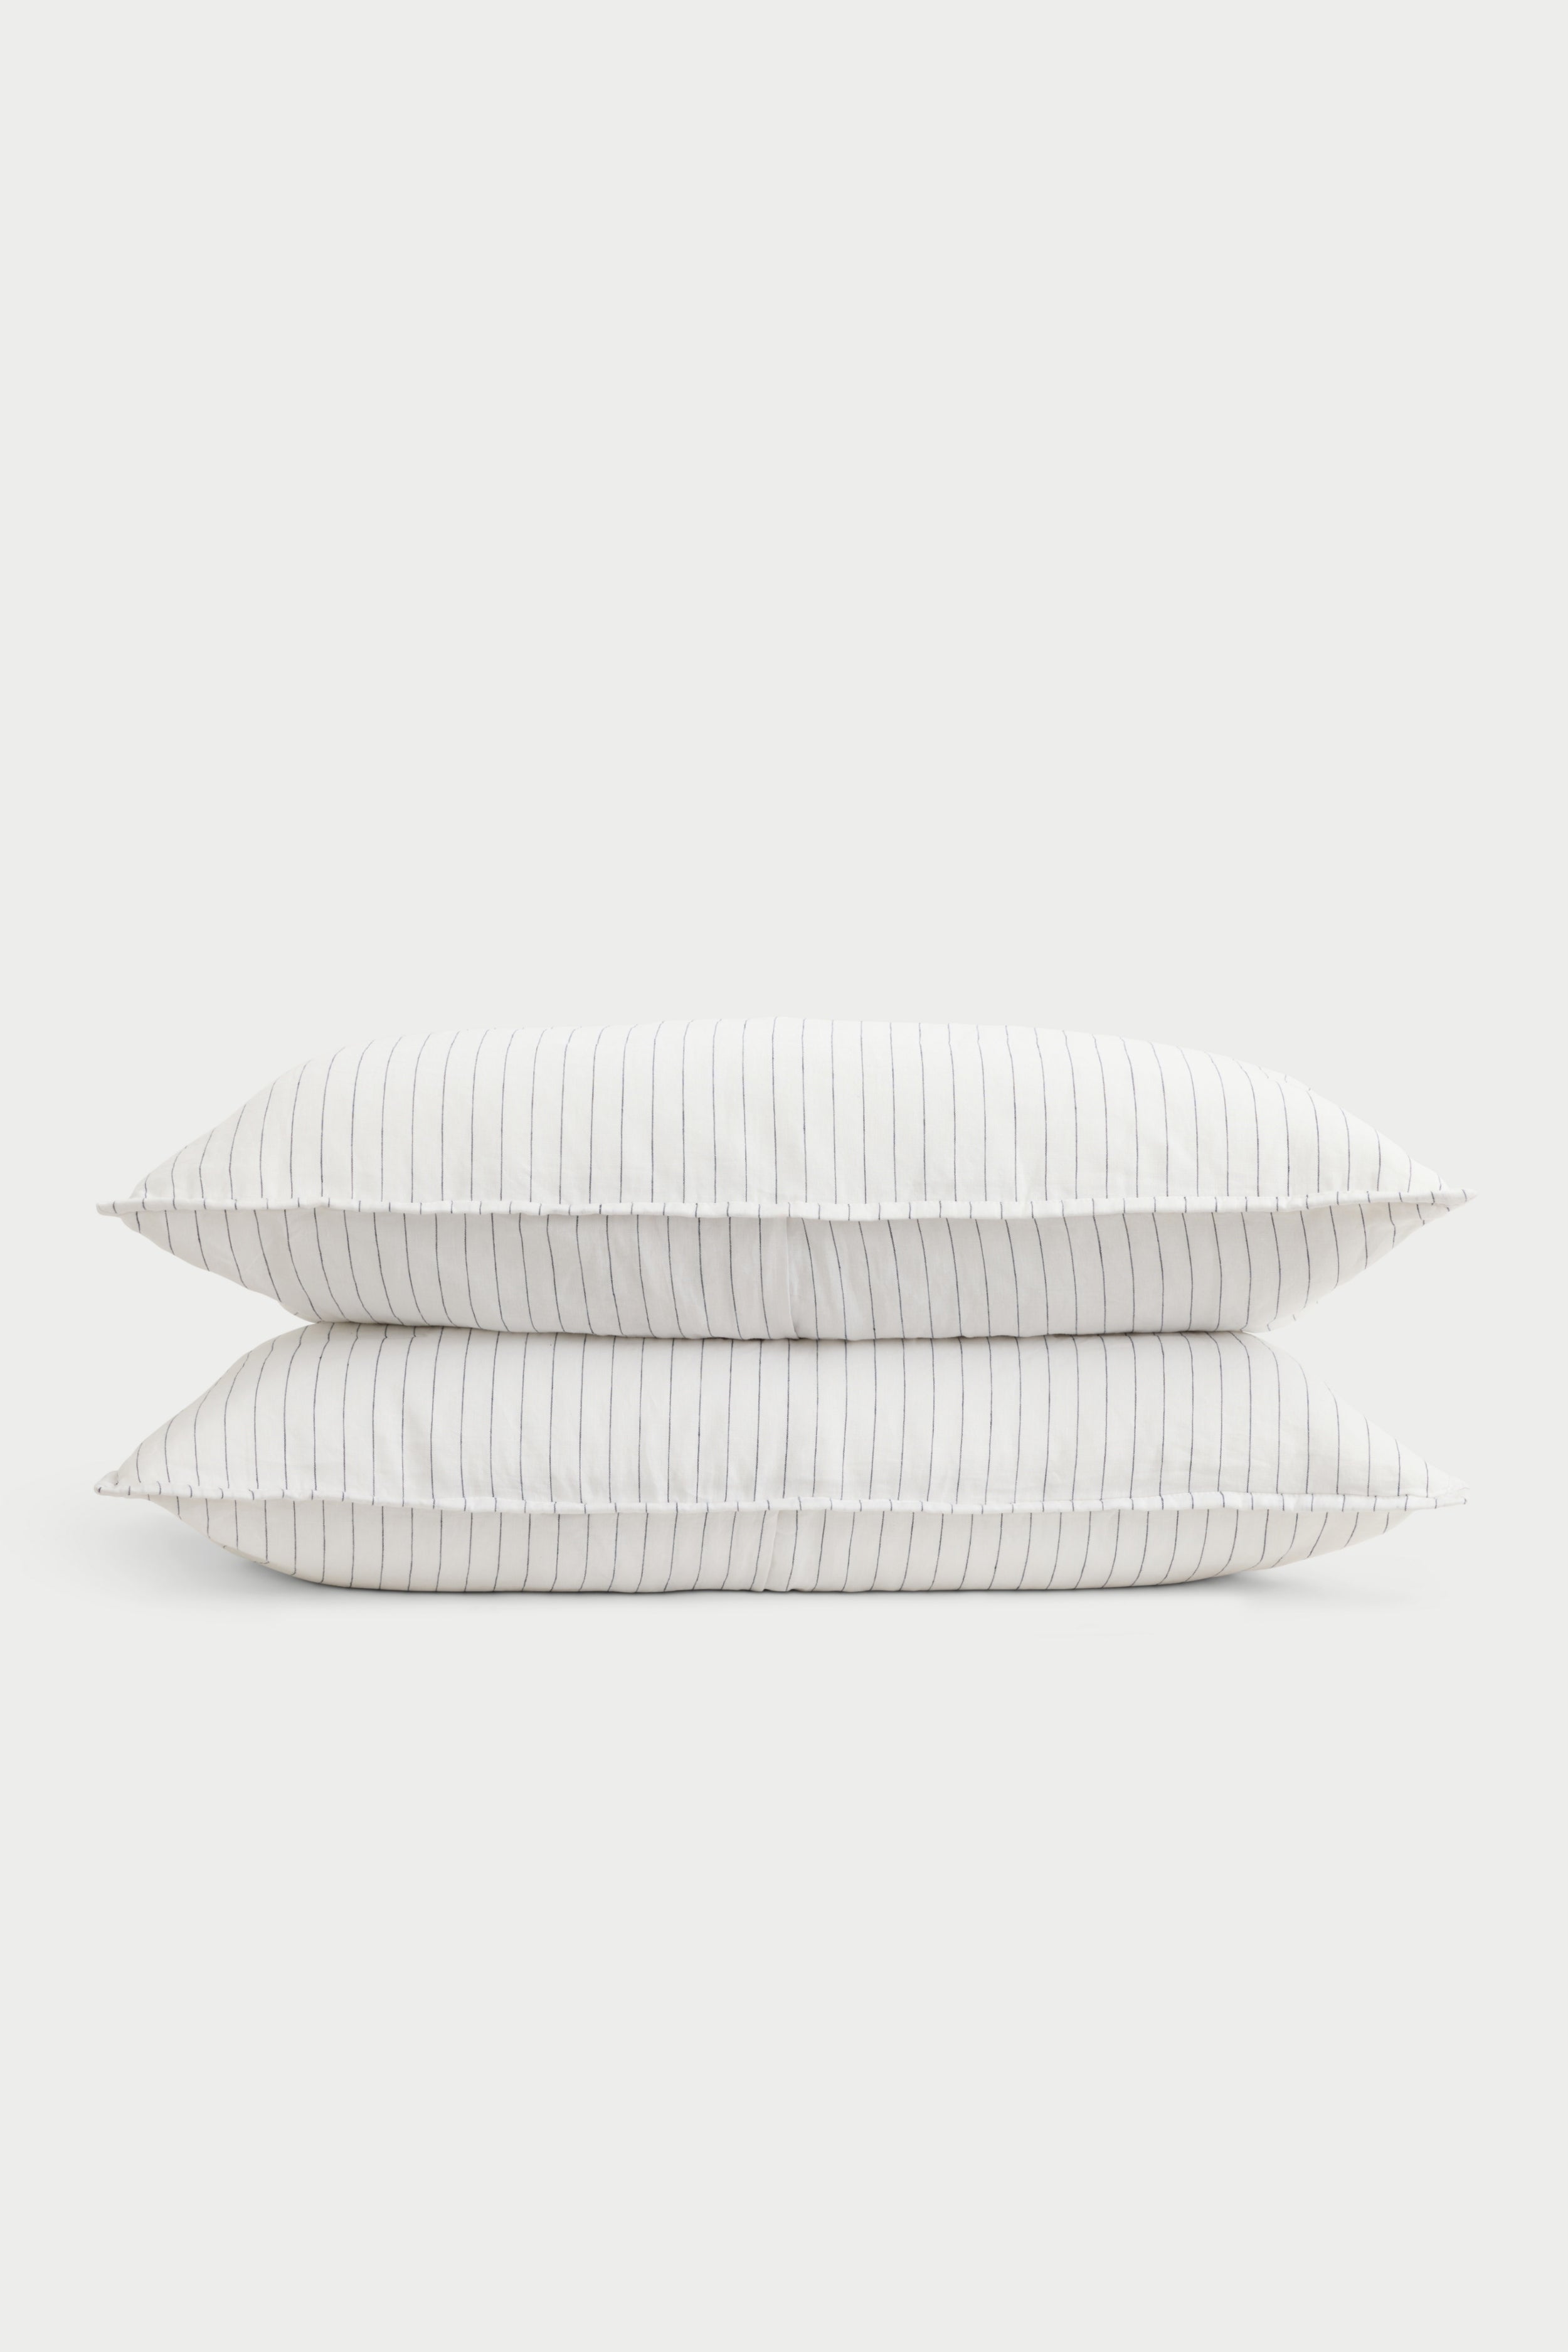 Two charcoal pencil stripe shams with white background |Size:Standard|Color:Charcoal/White